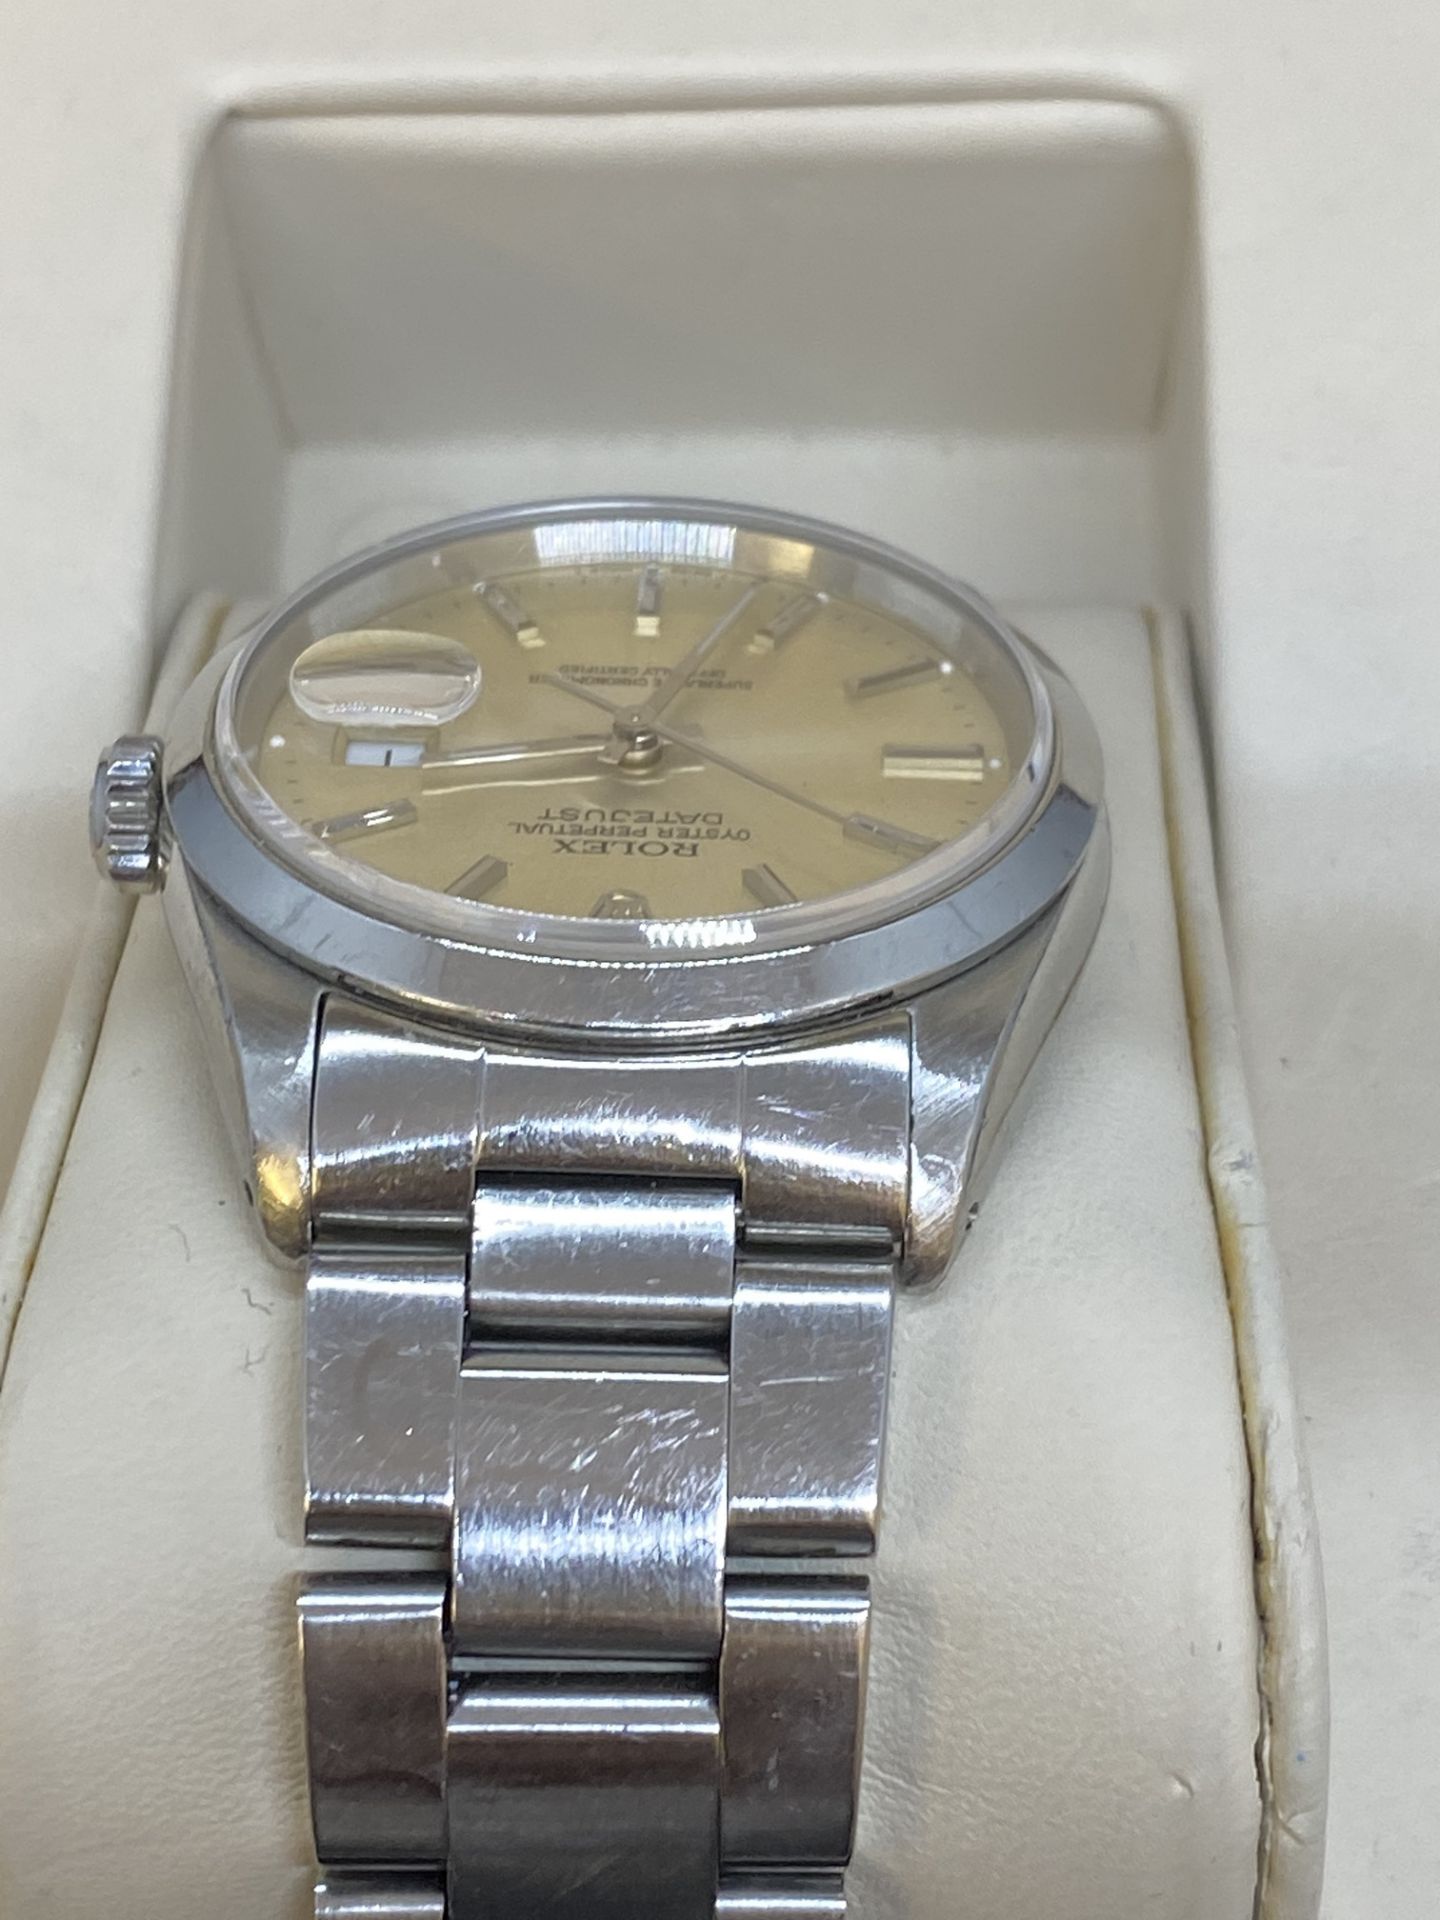 ROLEX STAINLESS STEEL WATCH - Image 6 of 8